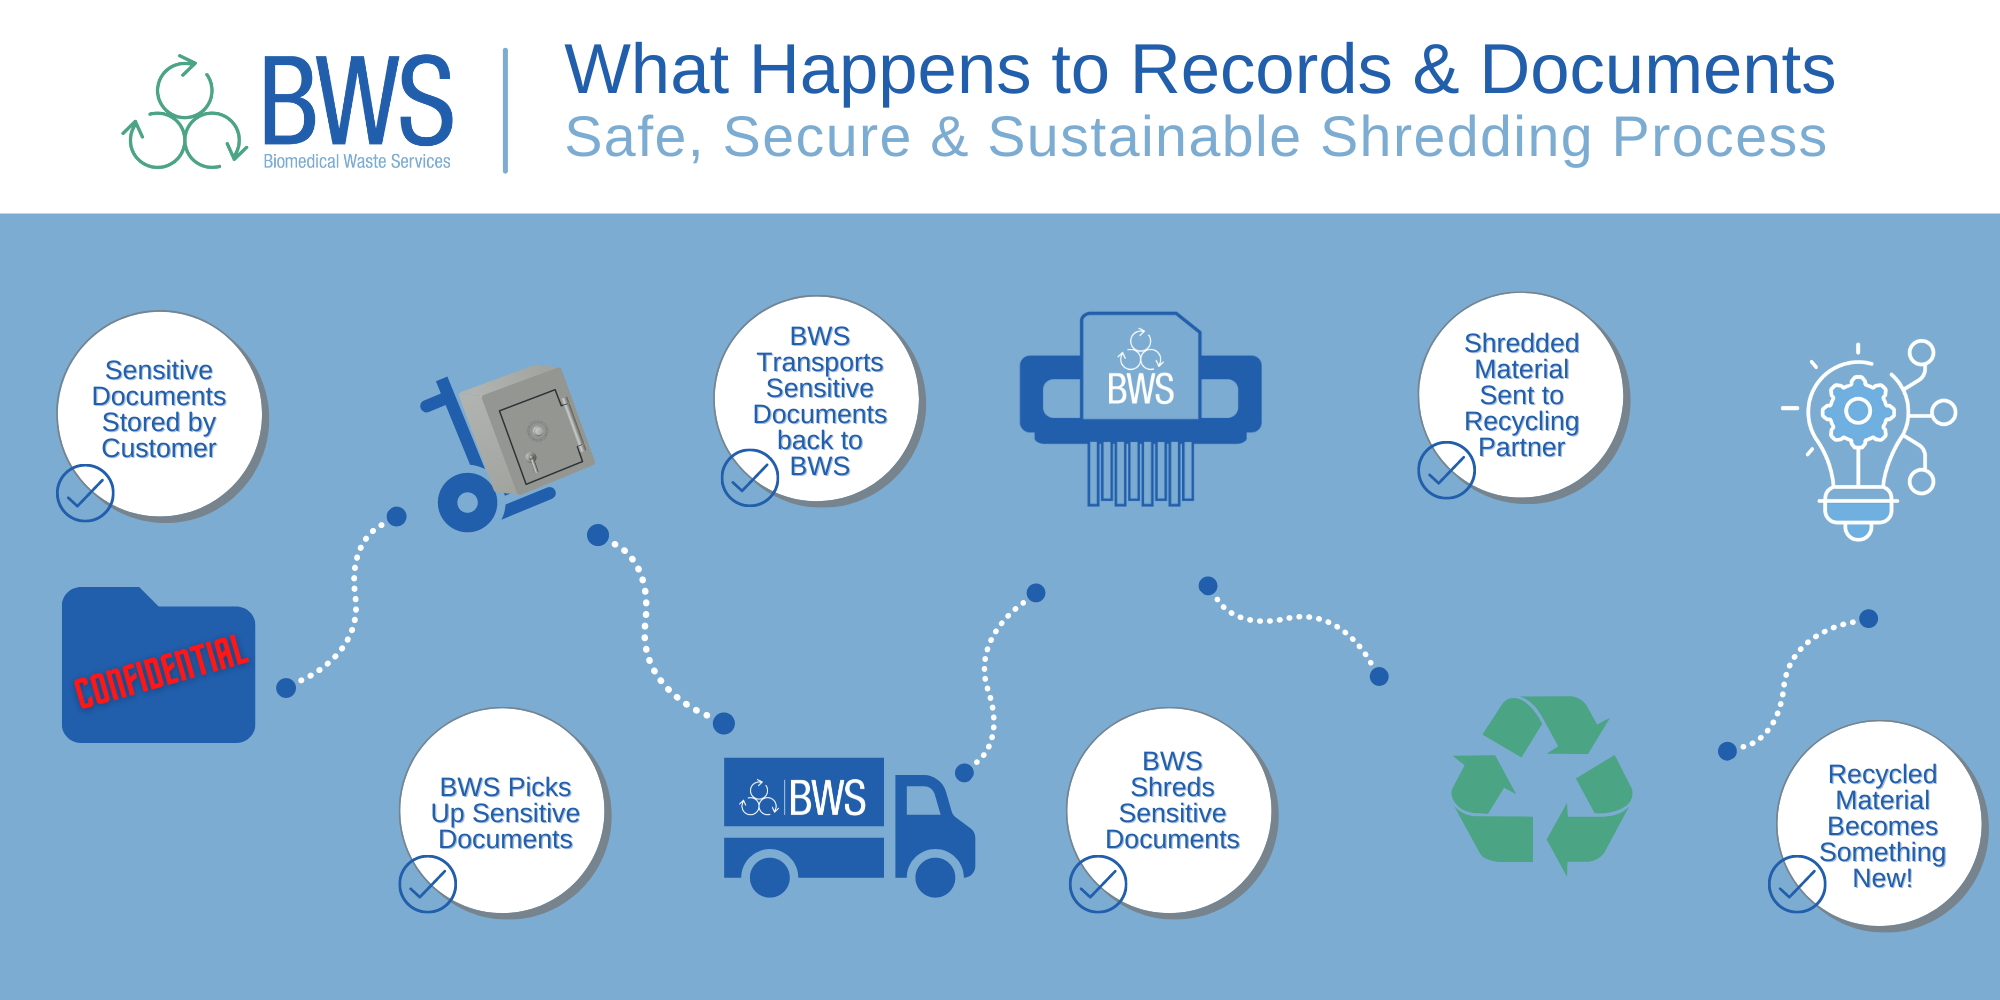 BWS Records Shredding Safe and Sustainable Process